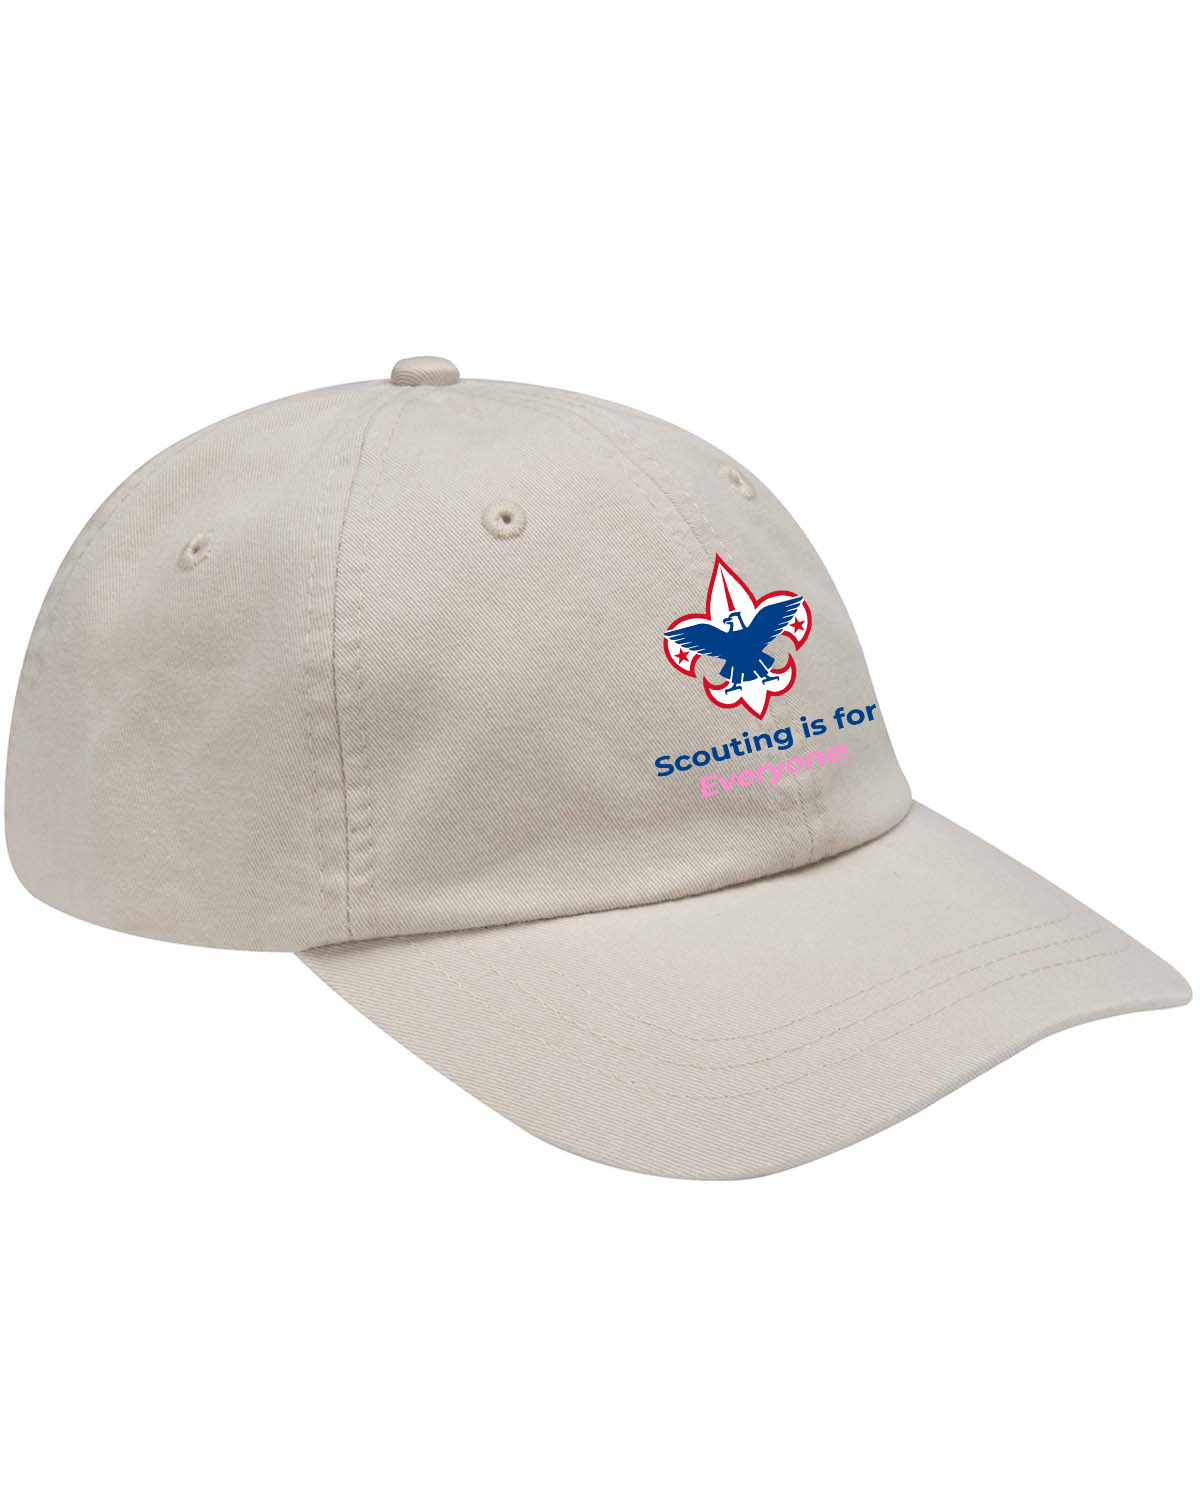 Adams ad969 6-Panel Low-Profile Washed Pigment-Dyed Cap $5.76 - Headwear